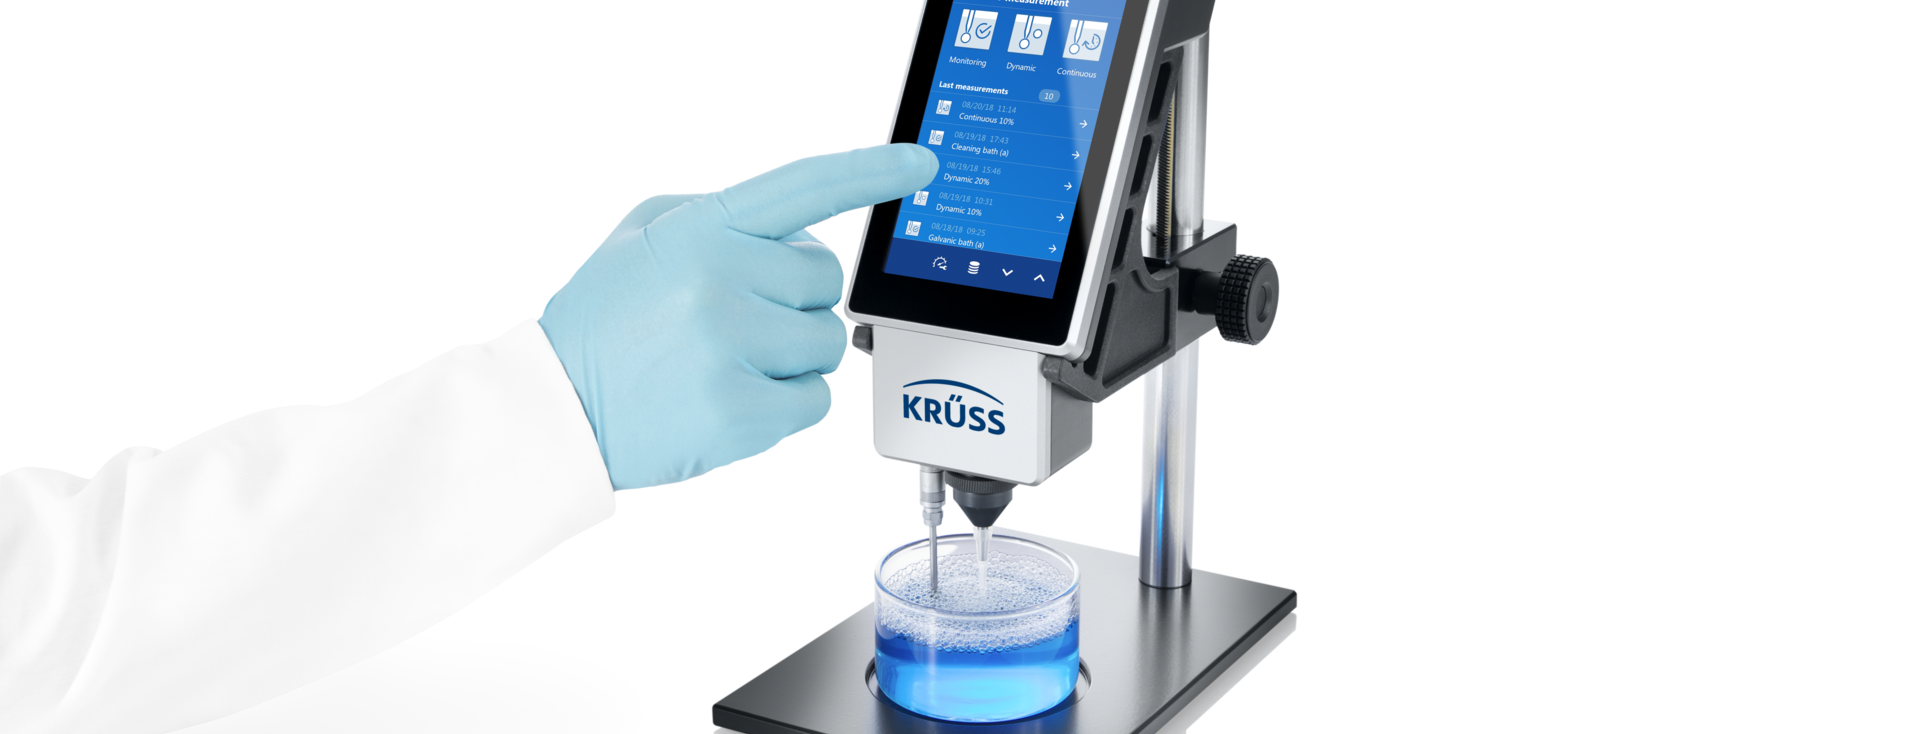 Bubble Pressure Tensiometer – BPT Mobile for monitoring surfactant content in cleaning and coating